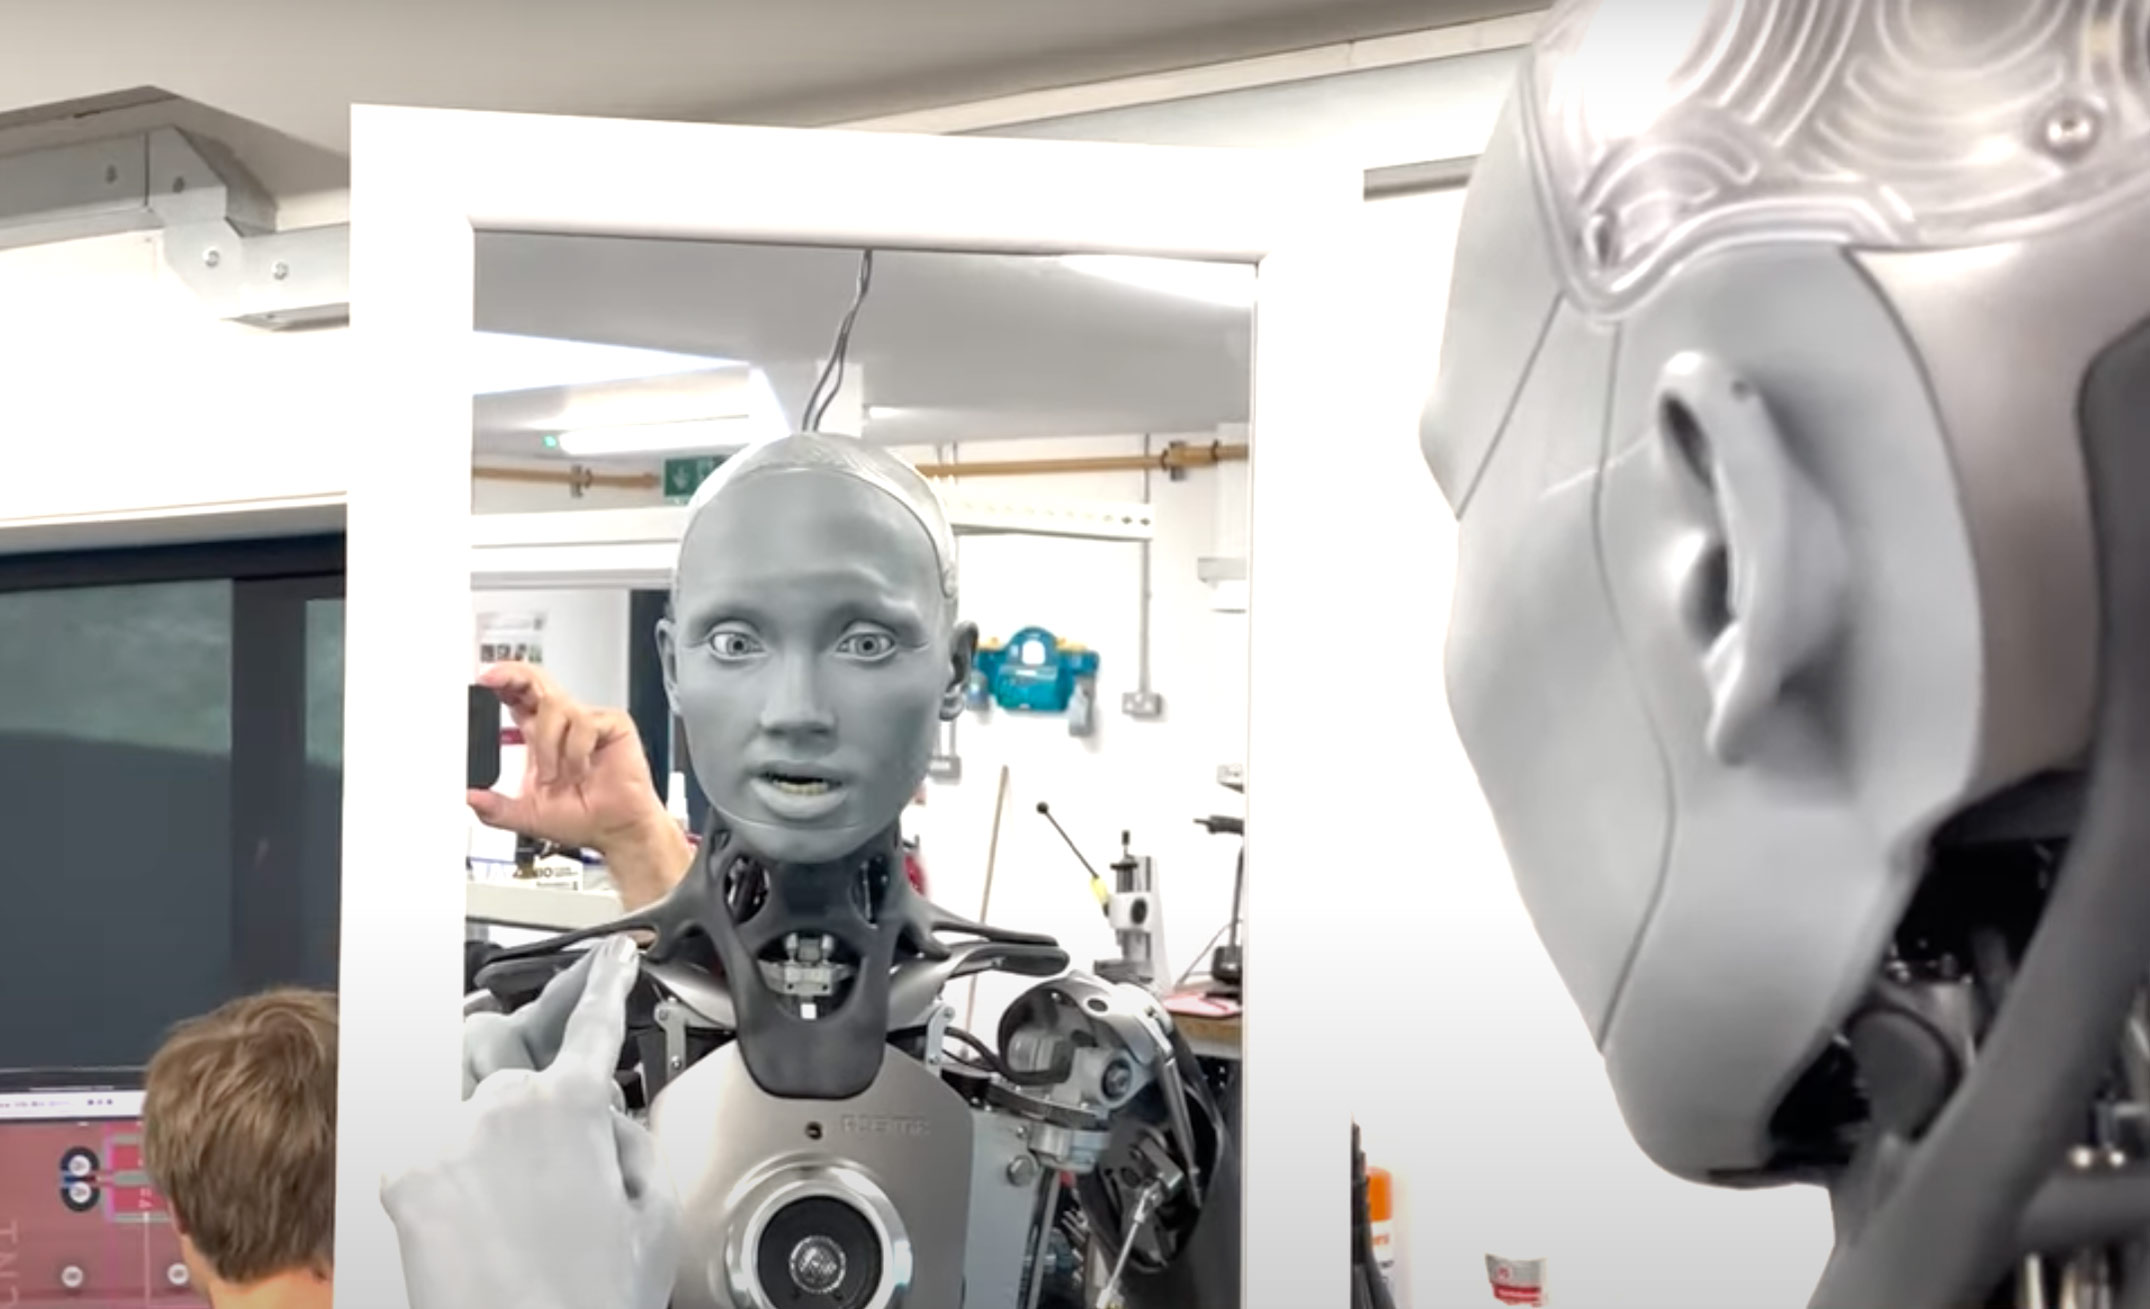 Watch creepy robot Ameca smile and imitate human expressions in terrifying video